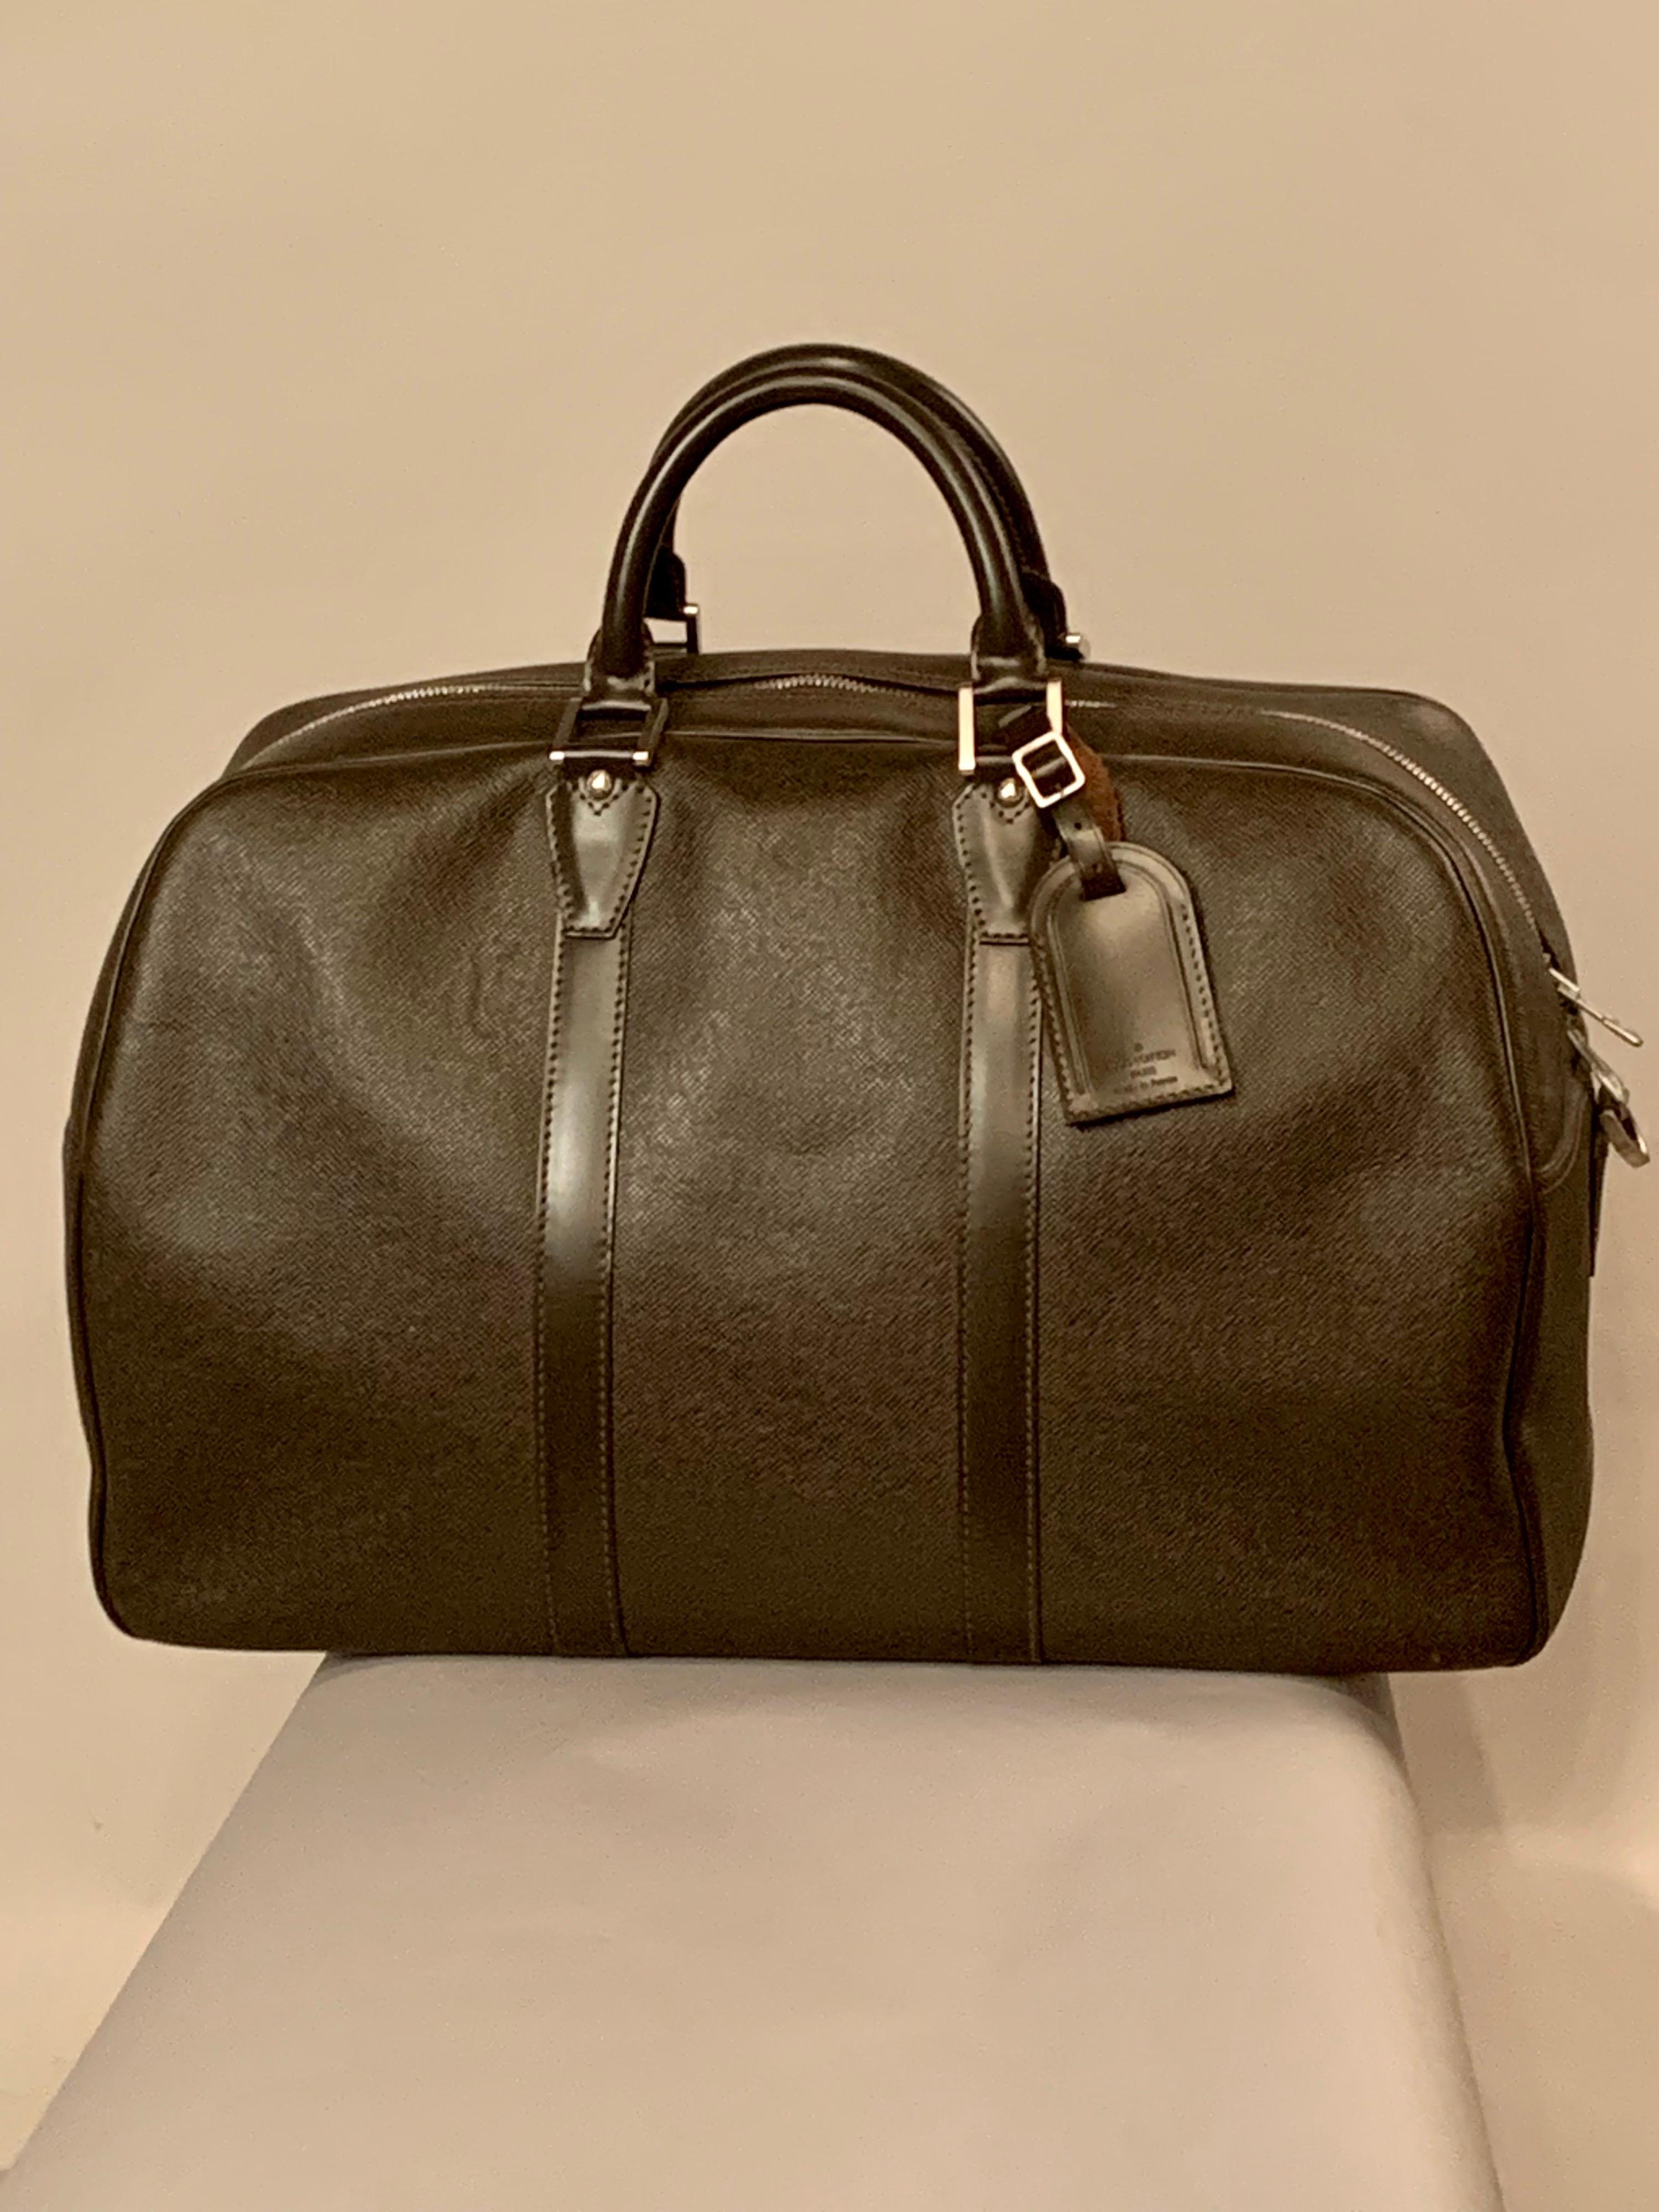 This Louis Vuitton Moka Taiga Carryall bag comes with a Louis Vuitton luggage tag and an adjustable canvas and leather shoulder strap.  The bag has two handles. a center zipper which goes half way down the sides for easy access, and silver tone